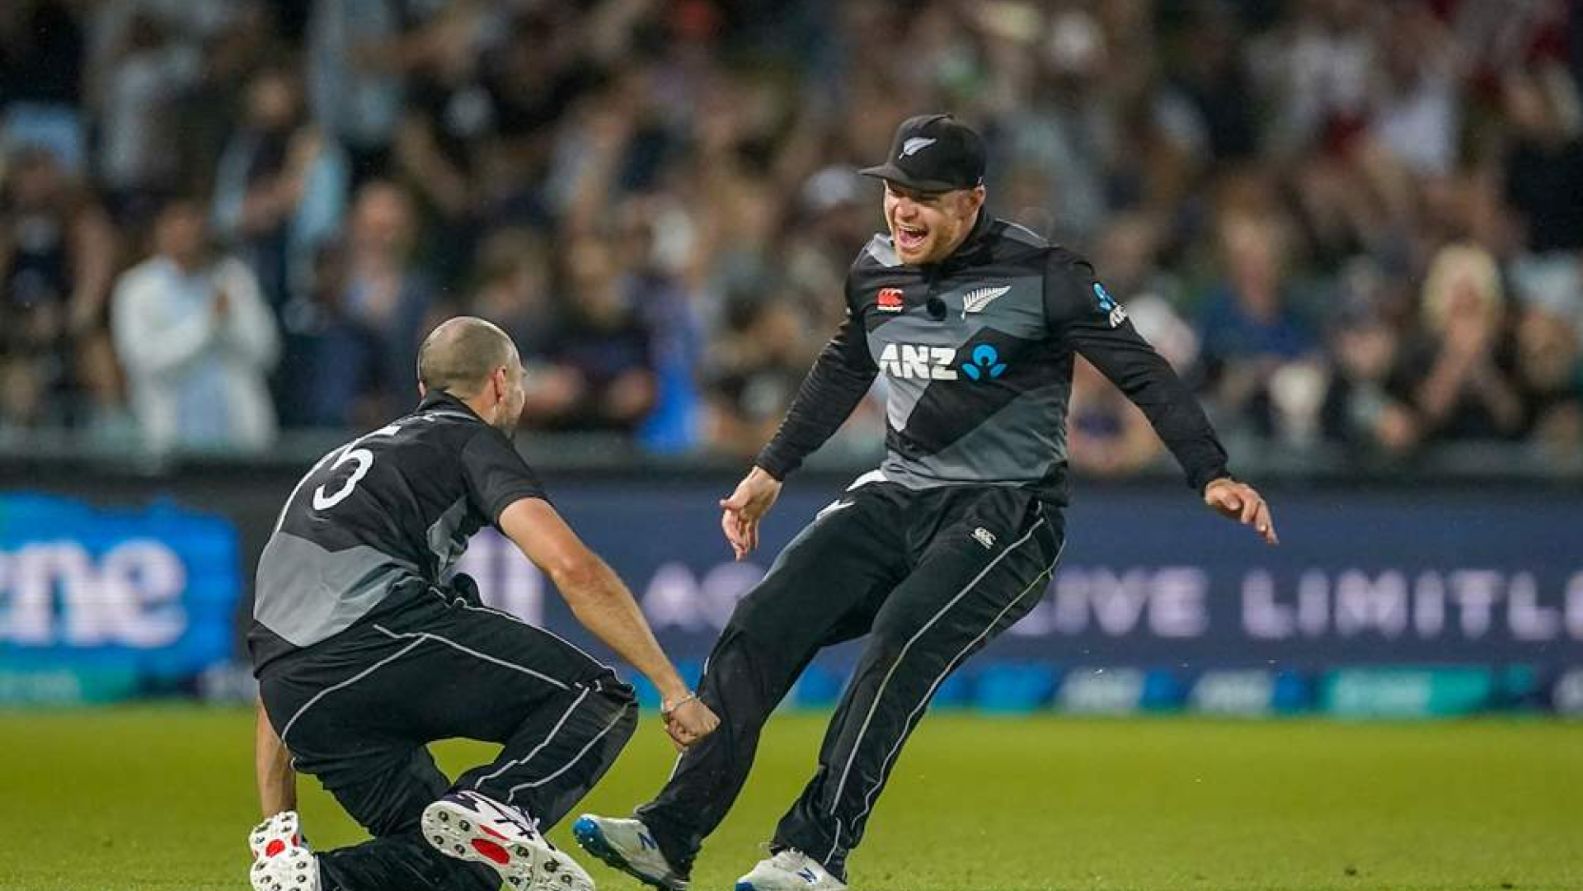 Daryl Mitchell, Glenn Phillips two new faces in New Zealand’s Central Contracts list 